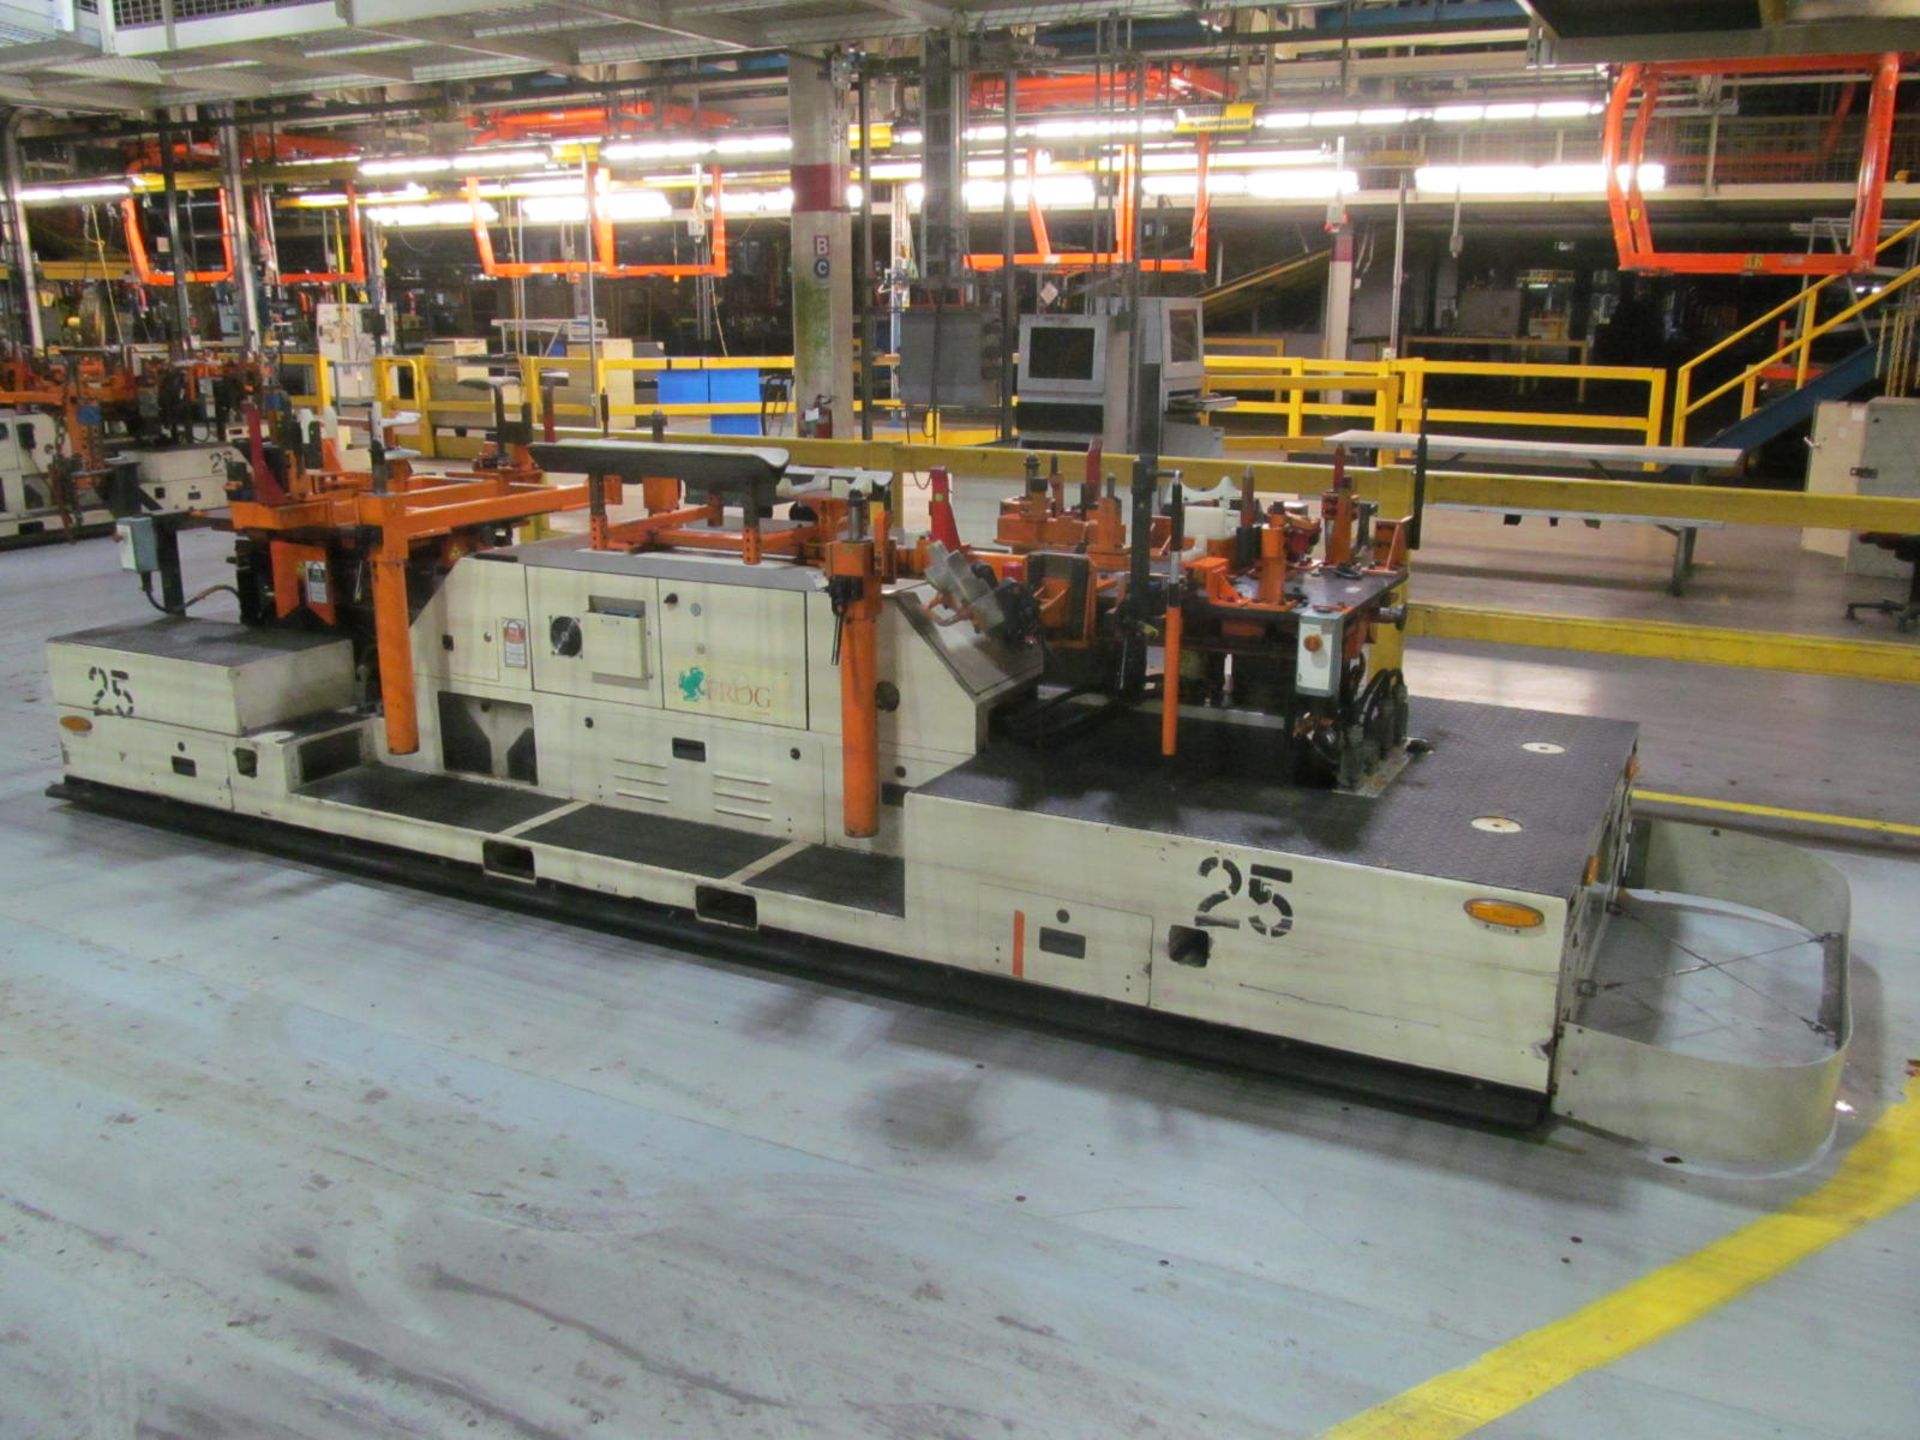 FROG GM COMMON AGV (AUTOMATED GUIDED VEHICLE), S/N 2002-025, 8000 LB. CAPACITY, 48 VOLT,